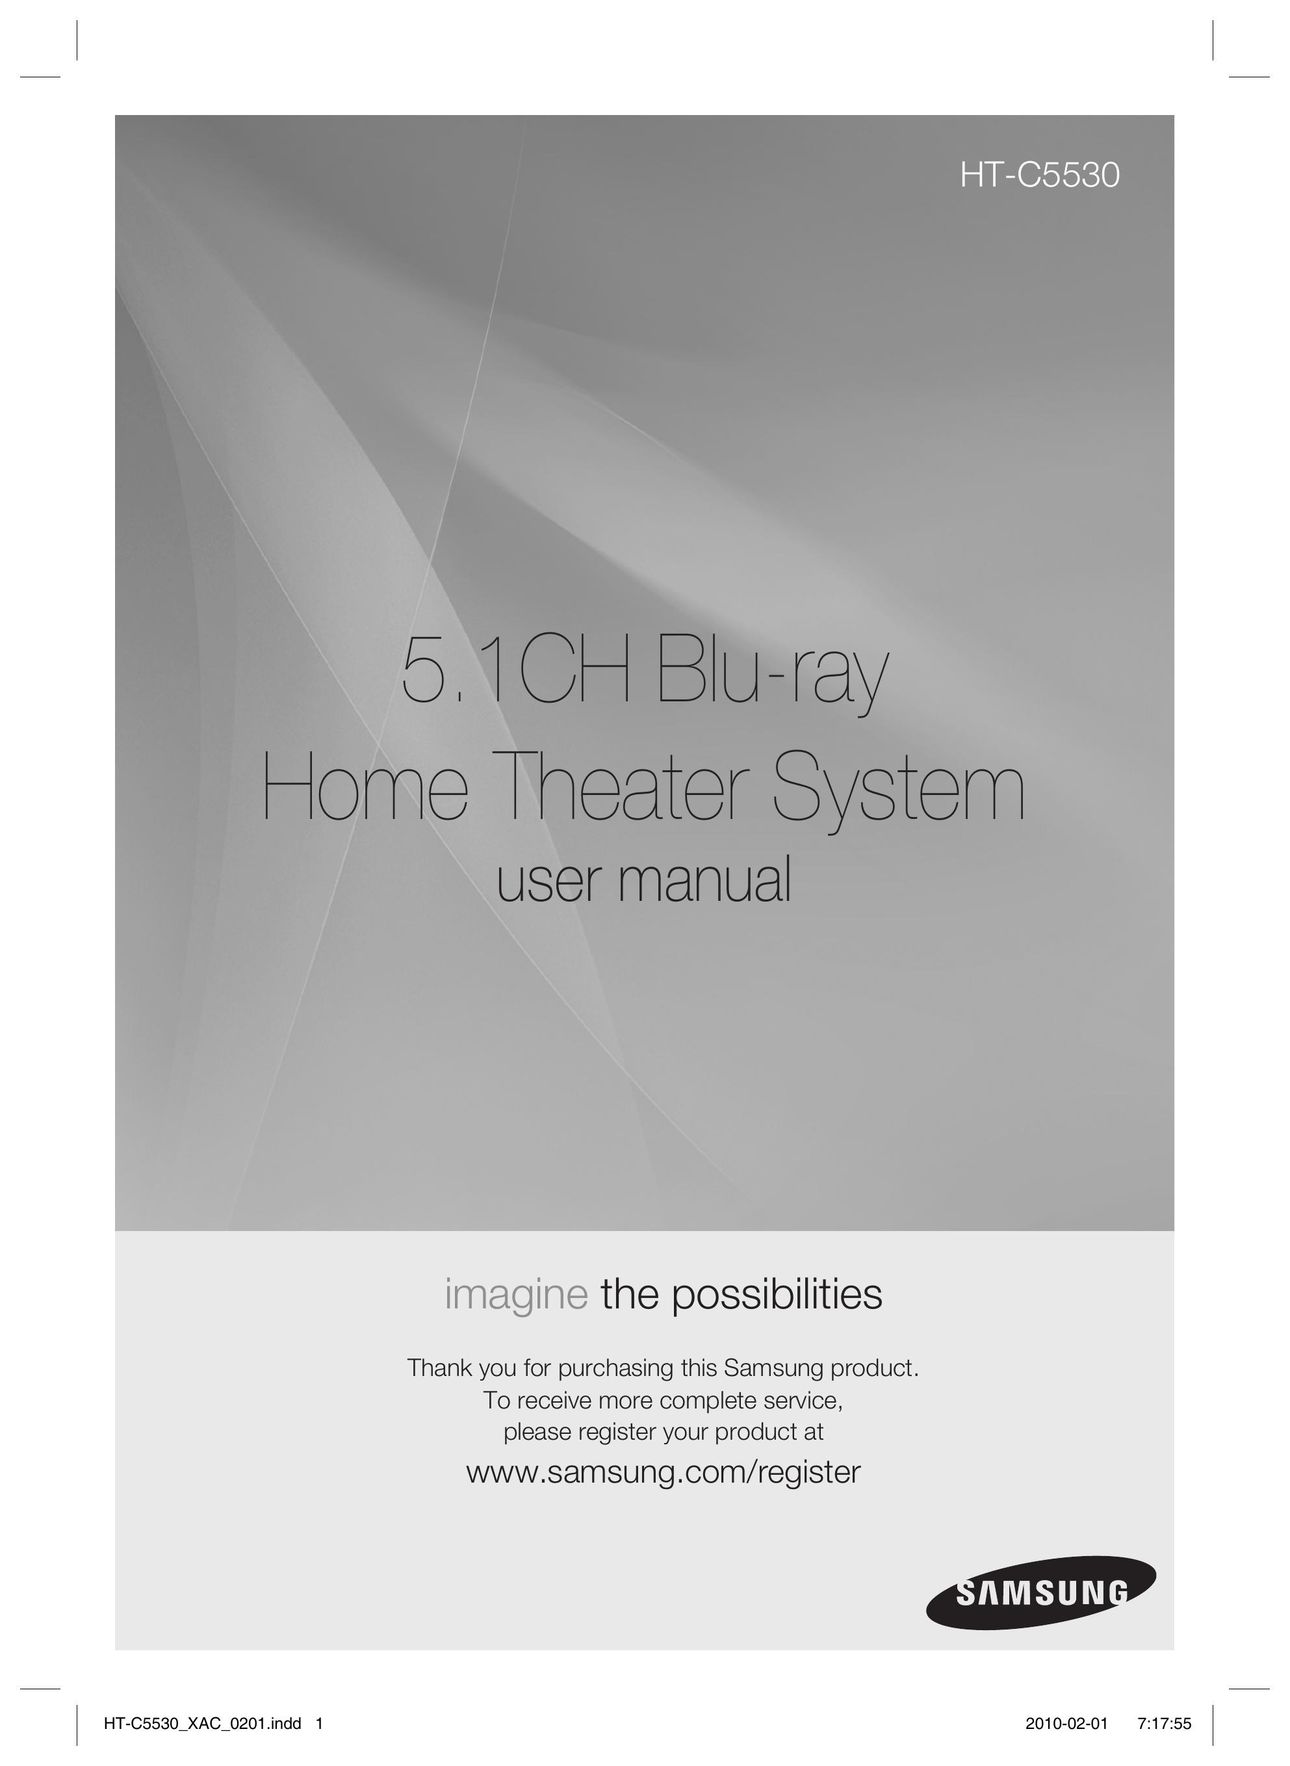 Samsung AH68-02256G Home Theater System User Manual